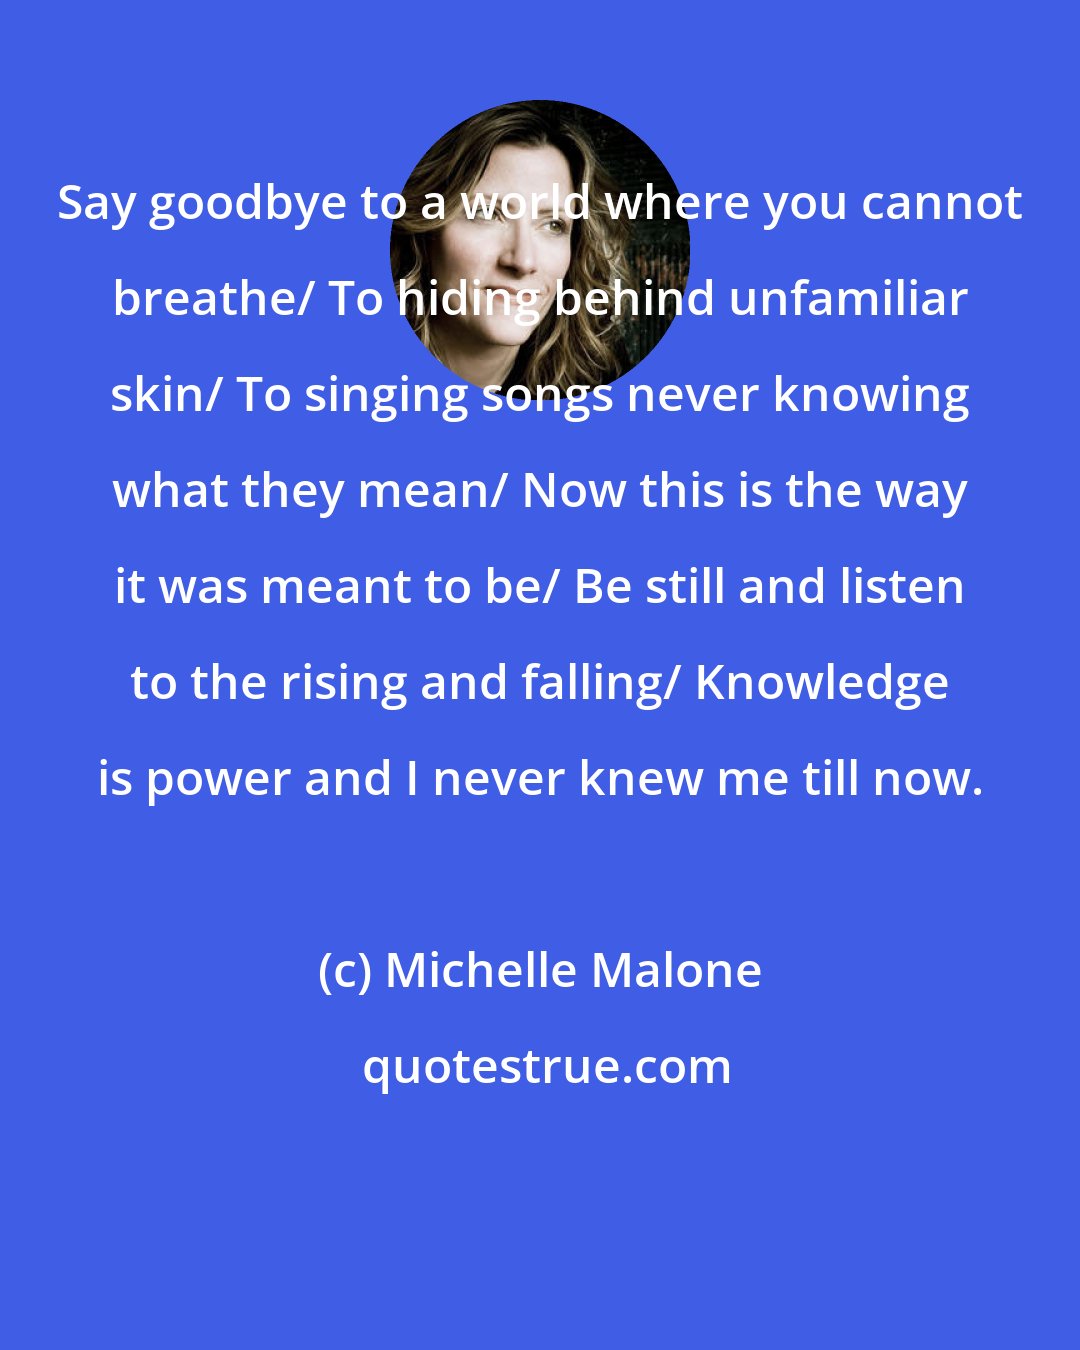 Michelle Malone: Say goodbye to a world where you cannot breathe/ To hiding behind unfamiliar skin/ To singing songs never knowing what they mean/ Now this is the way it was meant to be/ Be still and listen to the rising and falling/ Knowledge is power and I never knew me till now.